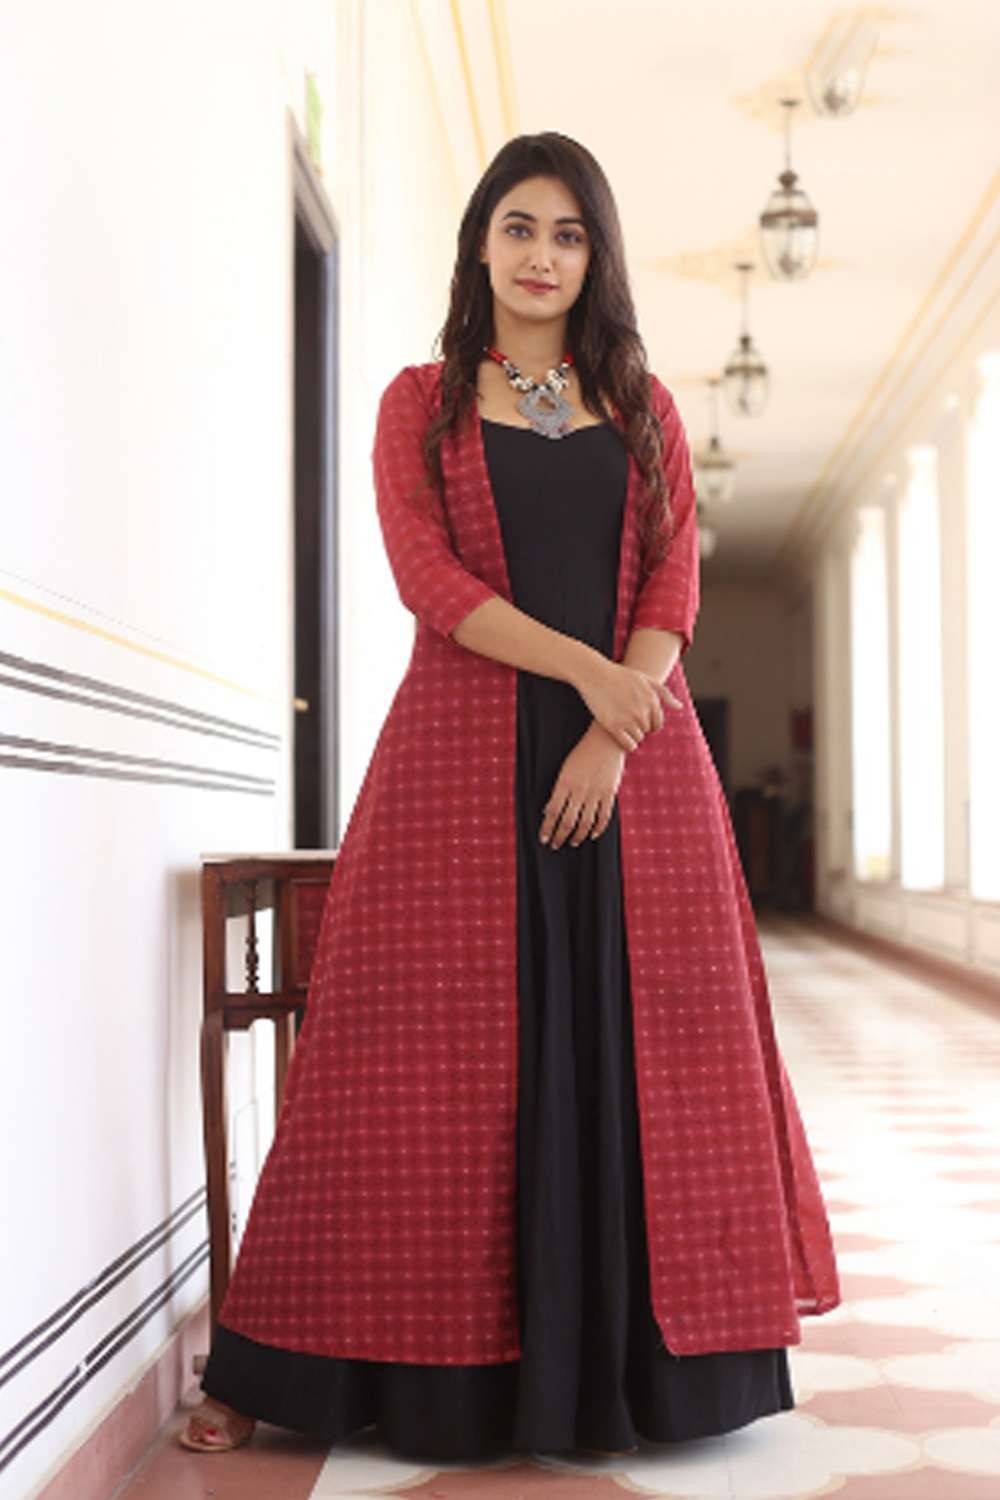 Valentine's Date outfit ideas - Red and Black dress | Fashionmate | Latest  Fashion Trends in India